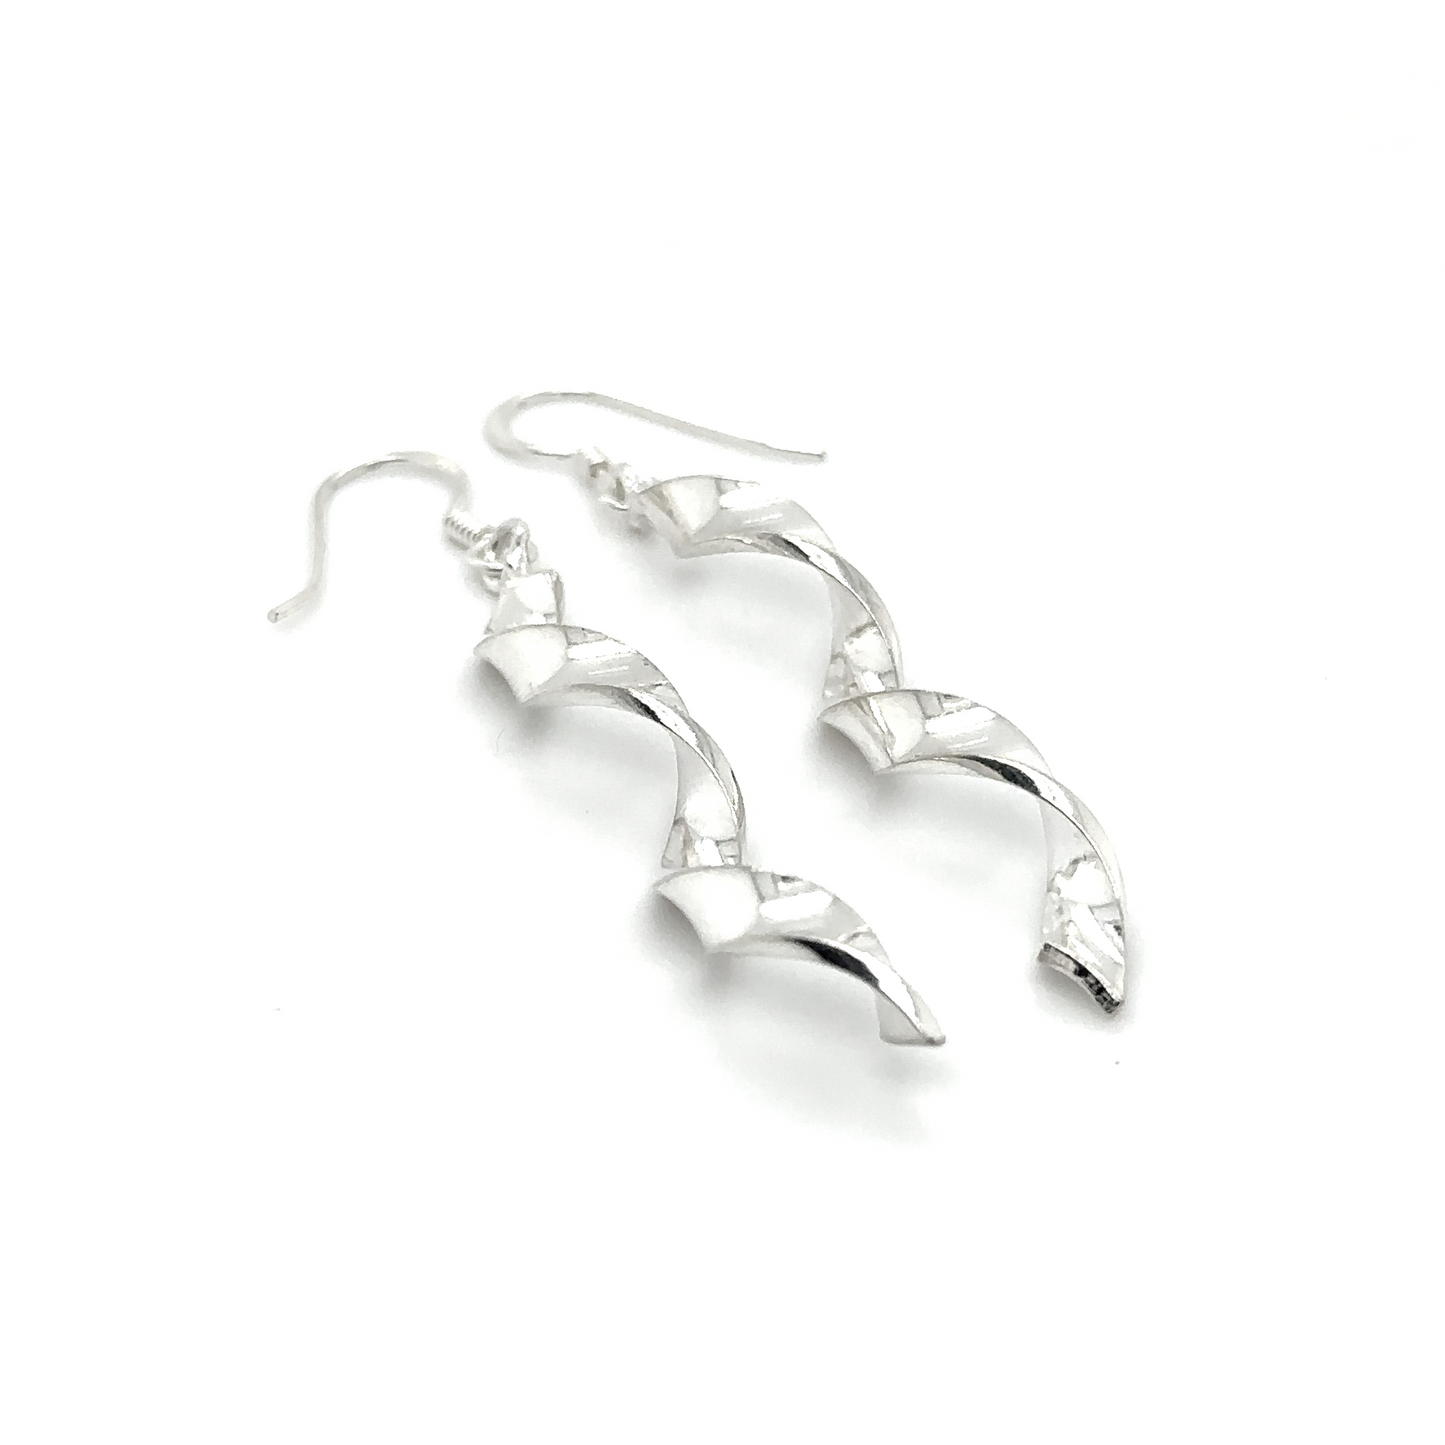 These Super Silver Simple Twisted Earrings with a curved shape will enhance any outfit.